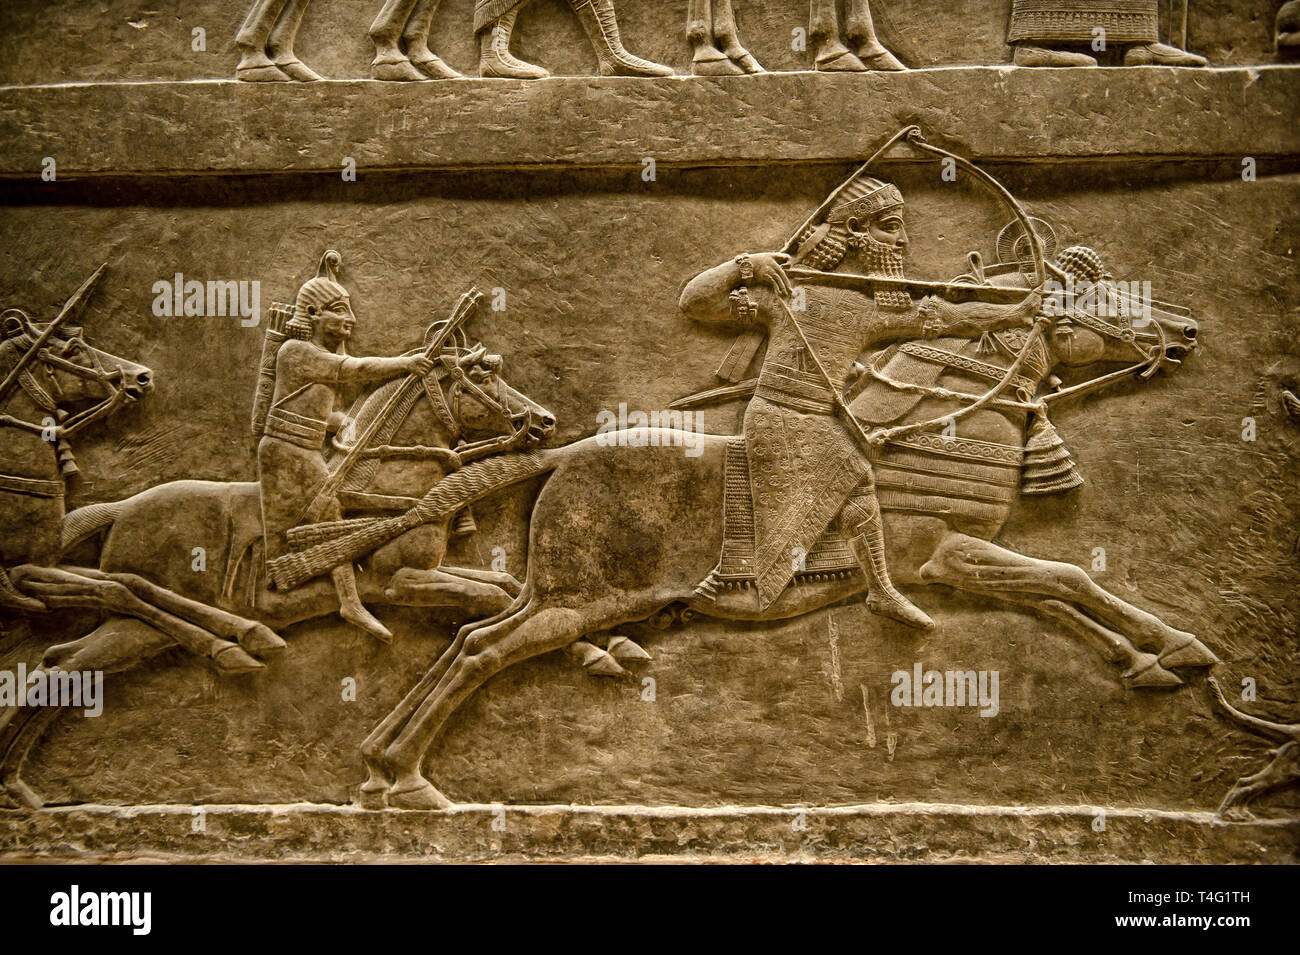 Assyrian relief sculpture panel of Ashurnasirpal lion hunting. From Nineveh  North Palace, Iraq, 668-627 B.C. British Museum Assyrian Archaeologic Stock  Photo - Alamy